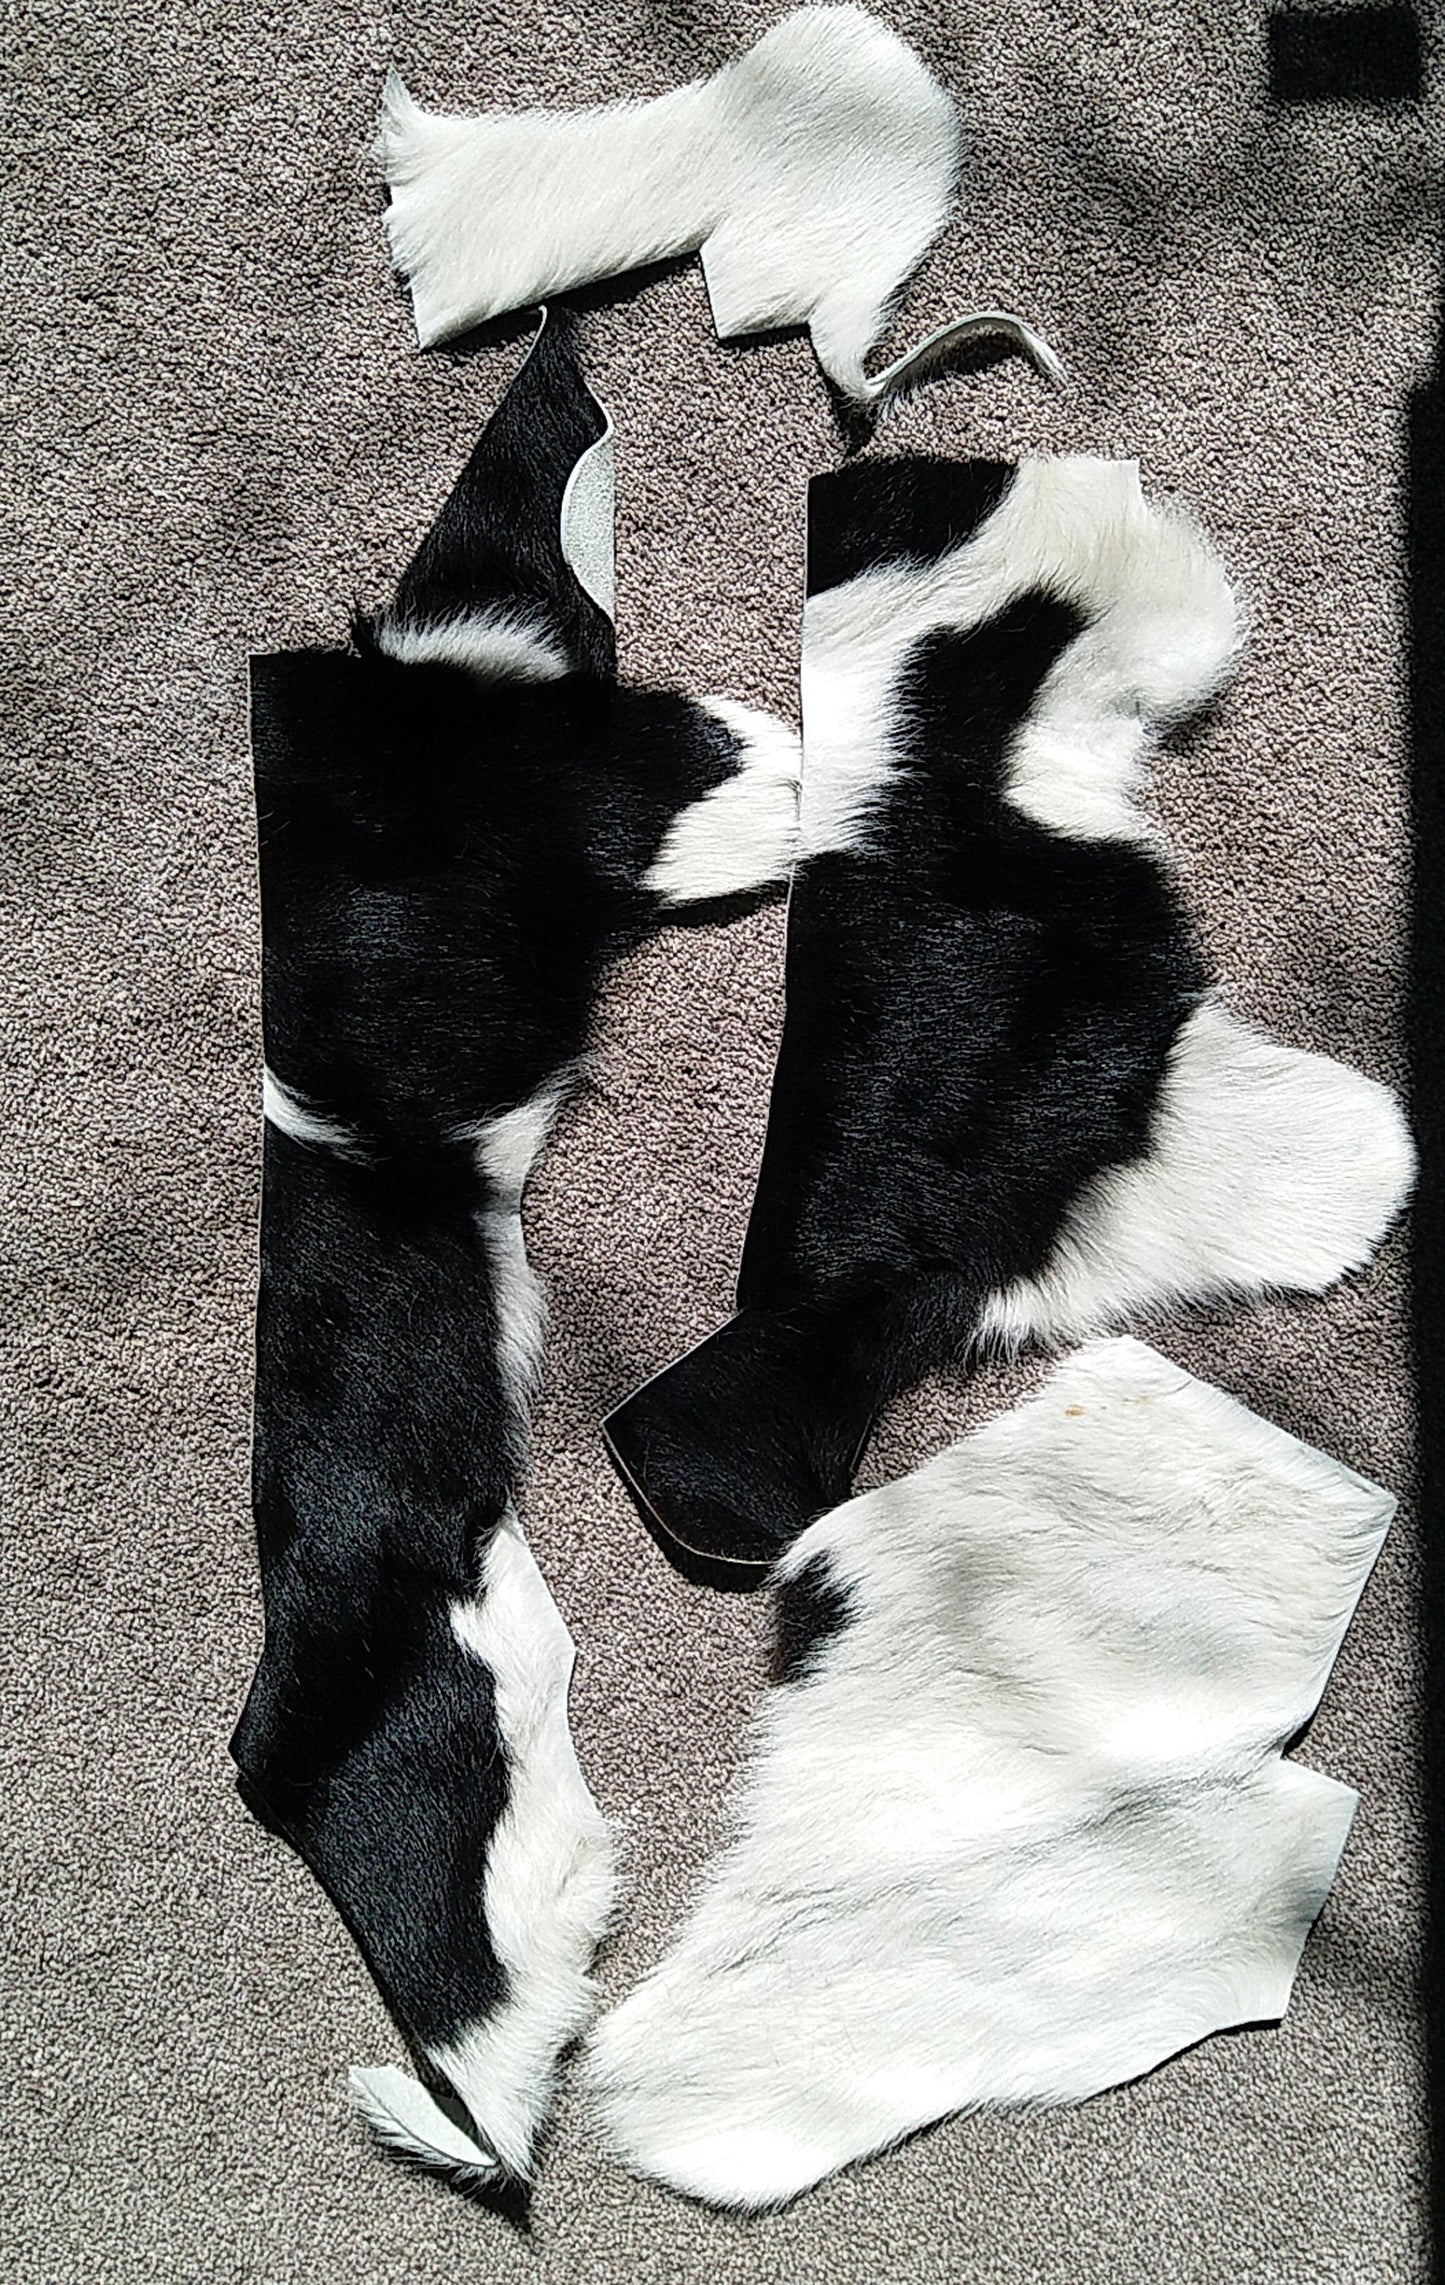 4 x Cowhide Leather Pieces - Black & White